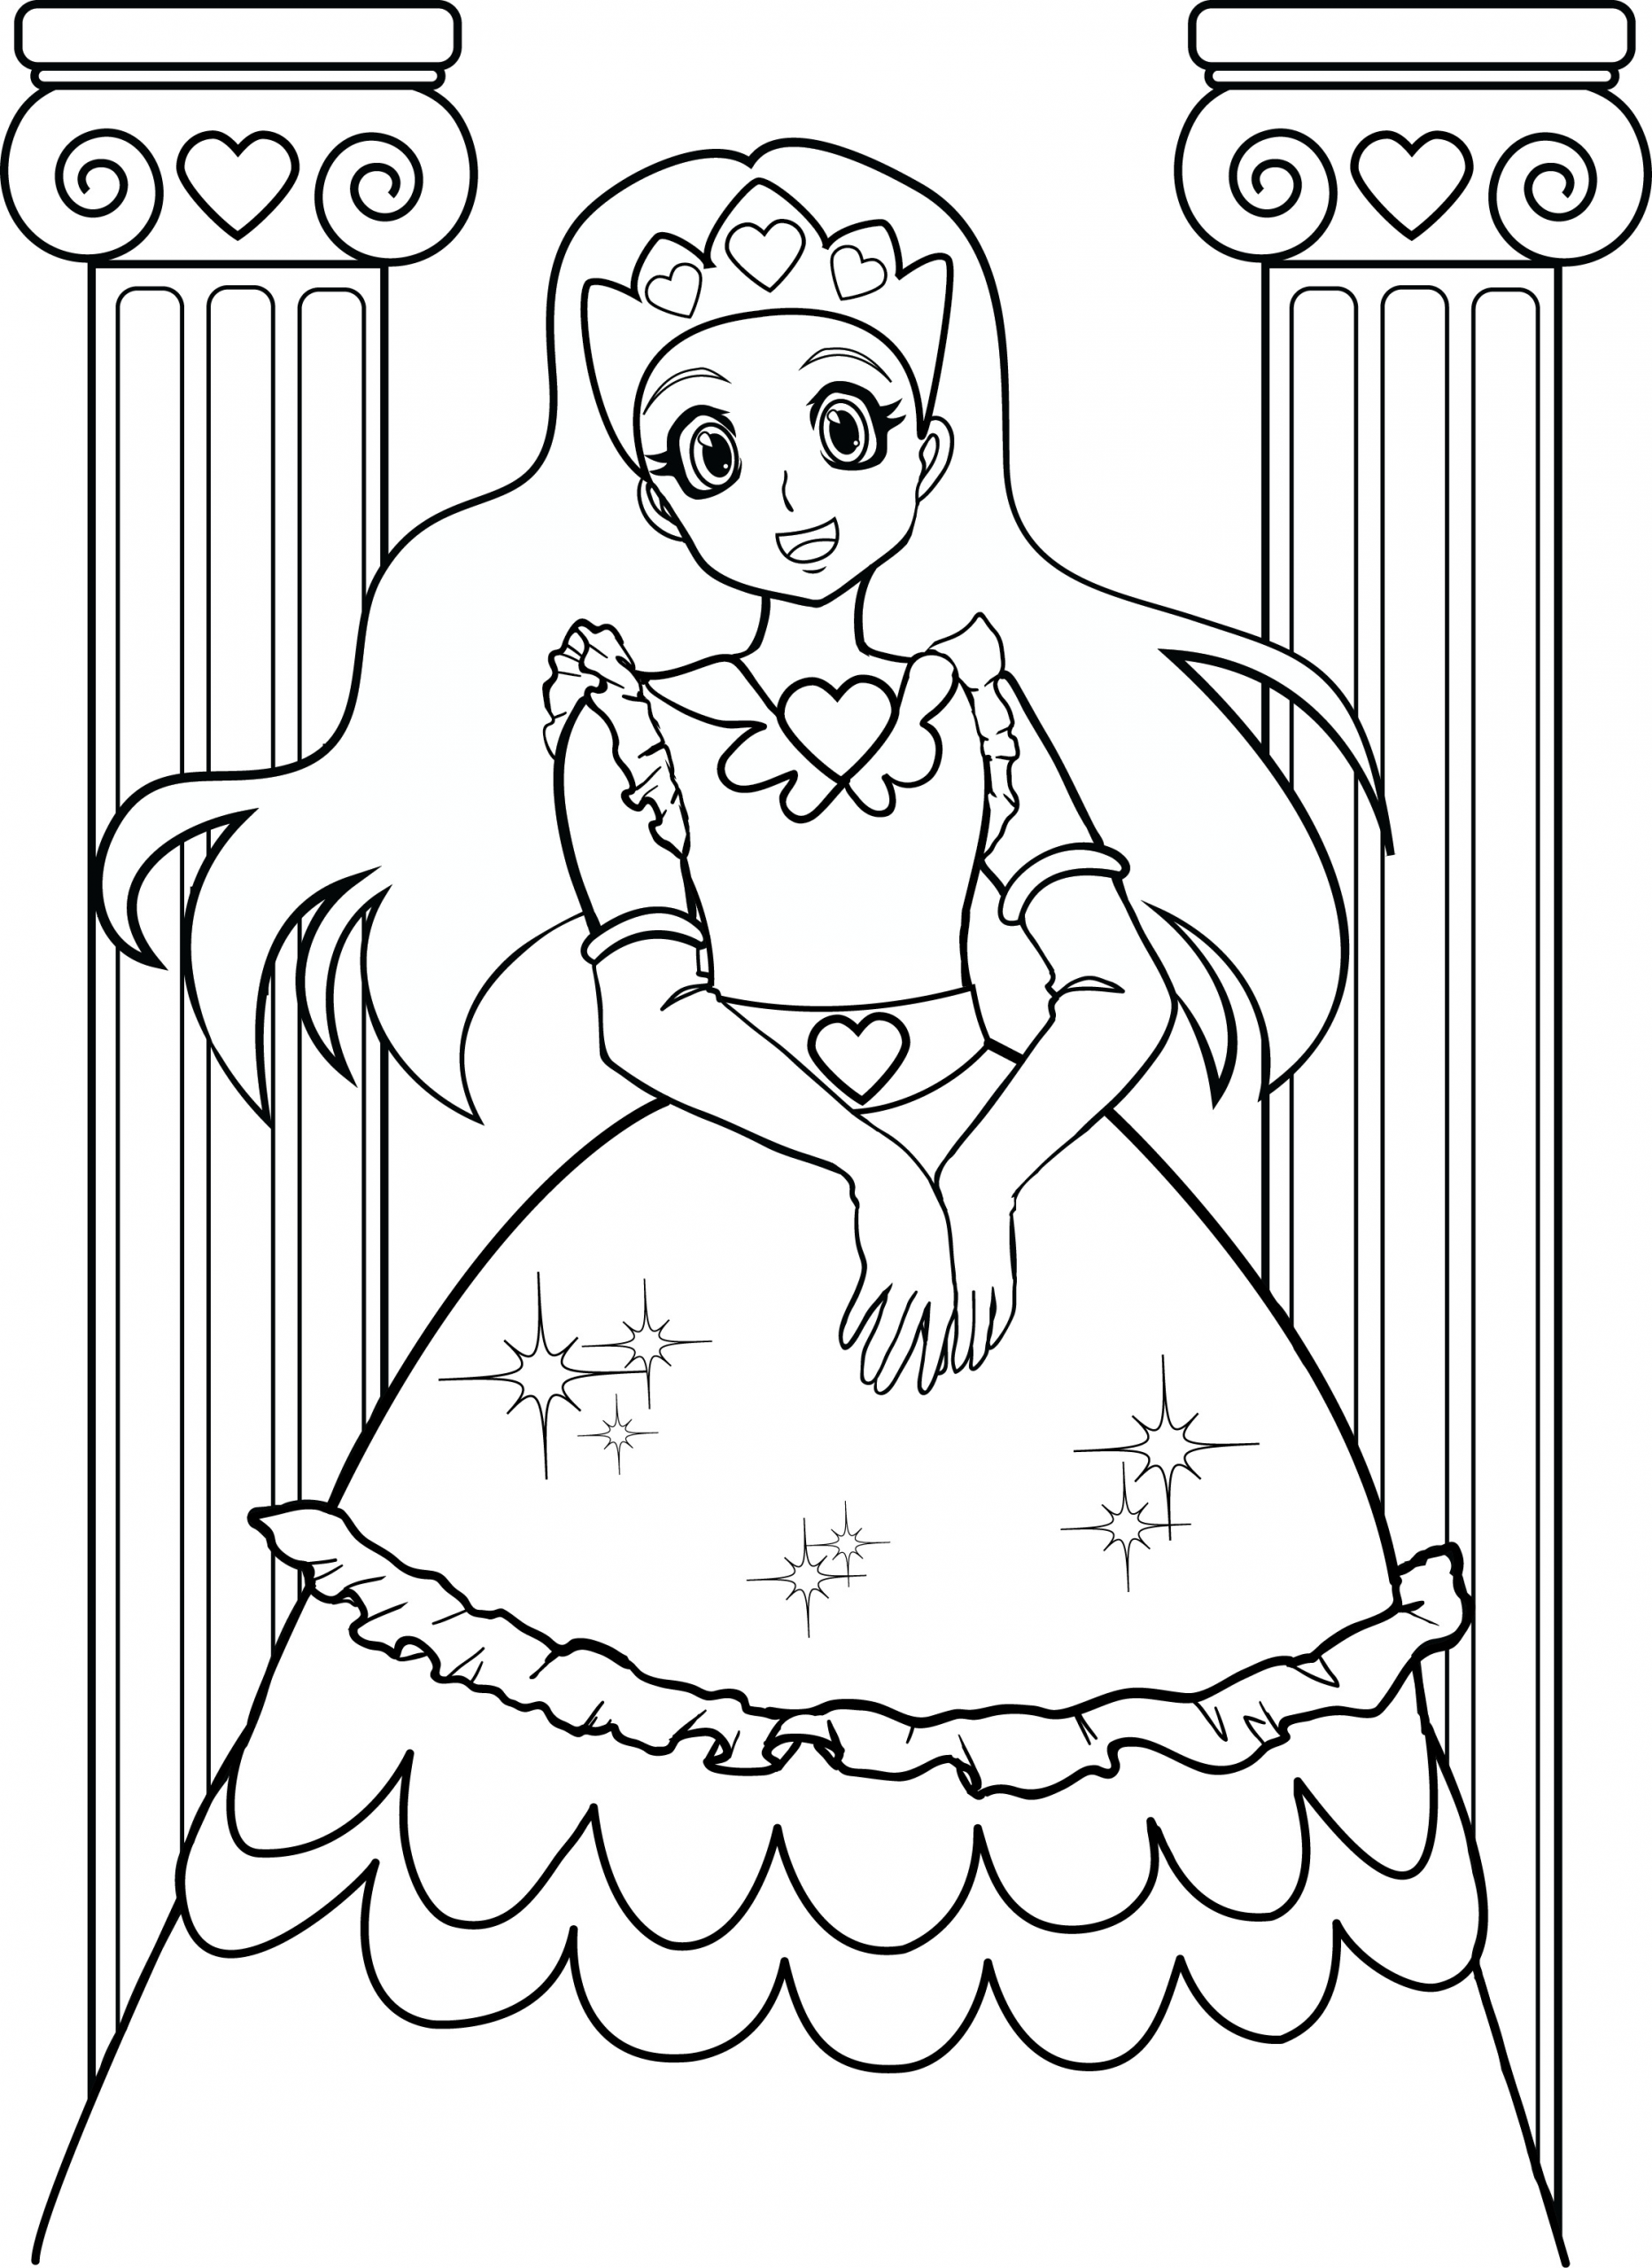 Coloring Sheets Kids
 Coloring Pages for Girls Best Coloring Pages For Kids